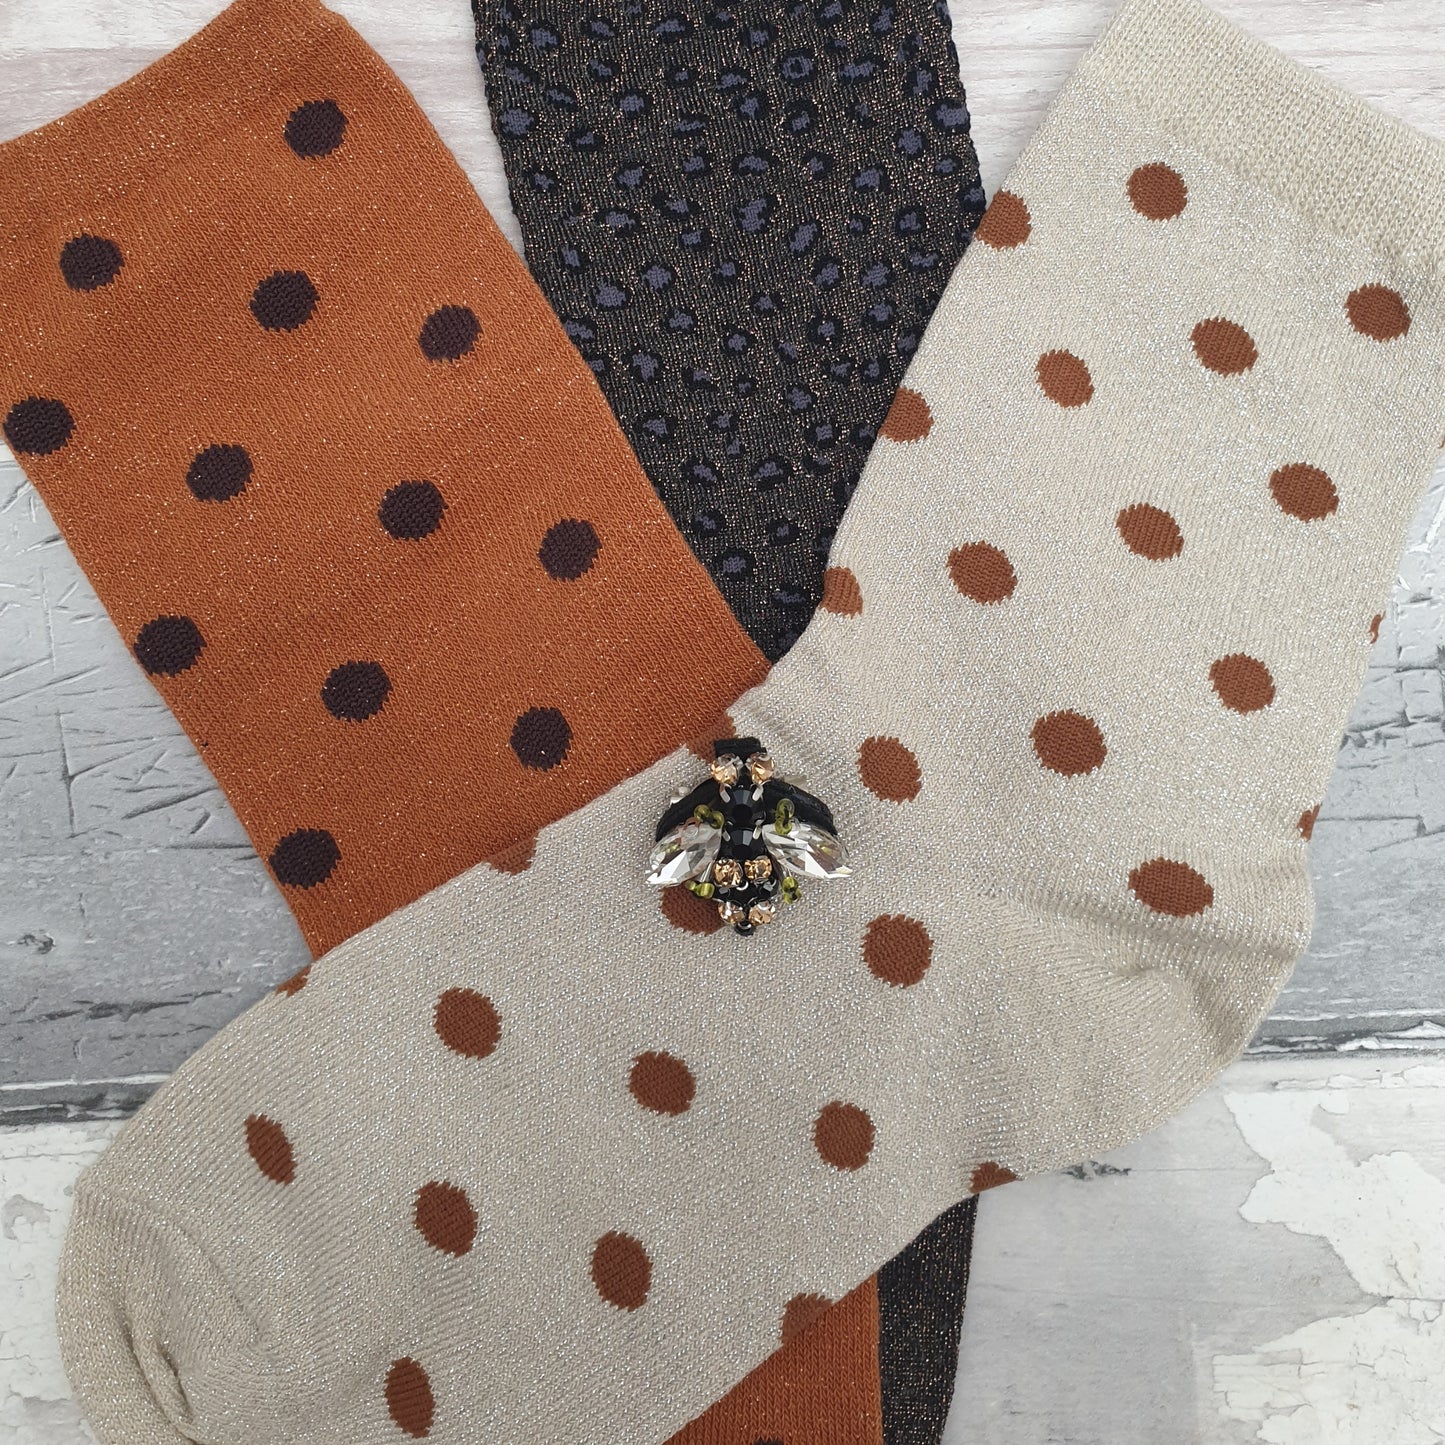 3 Pairs of Socks; cream spotty, copper spotty and silver grey leopard print, all with a sparkly finish. Set is completed with a Bee Brooch.